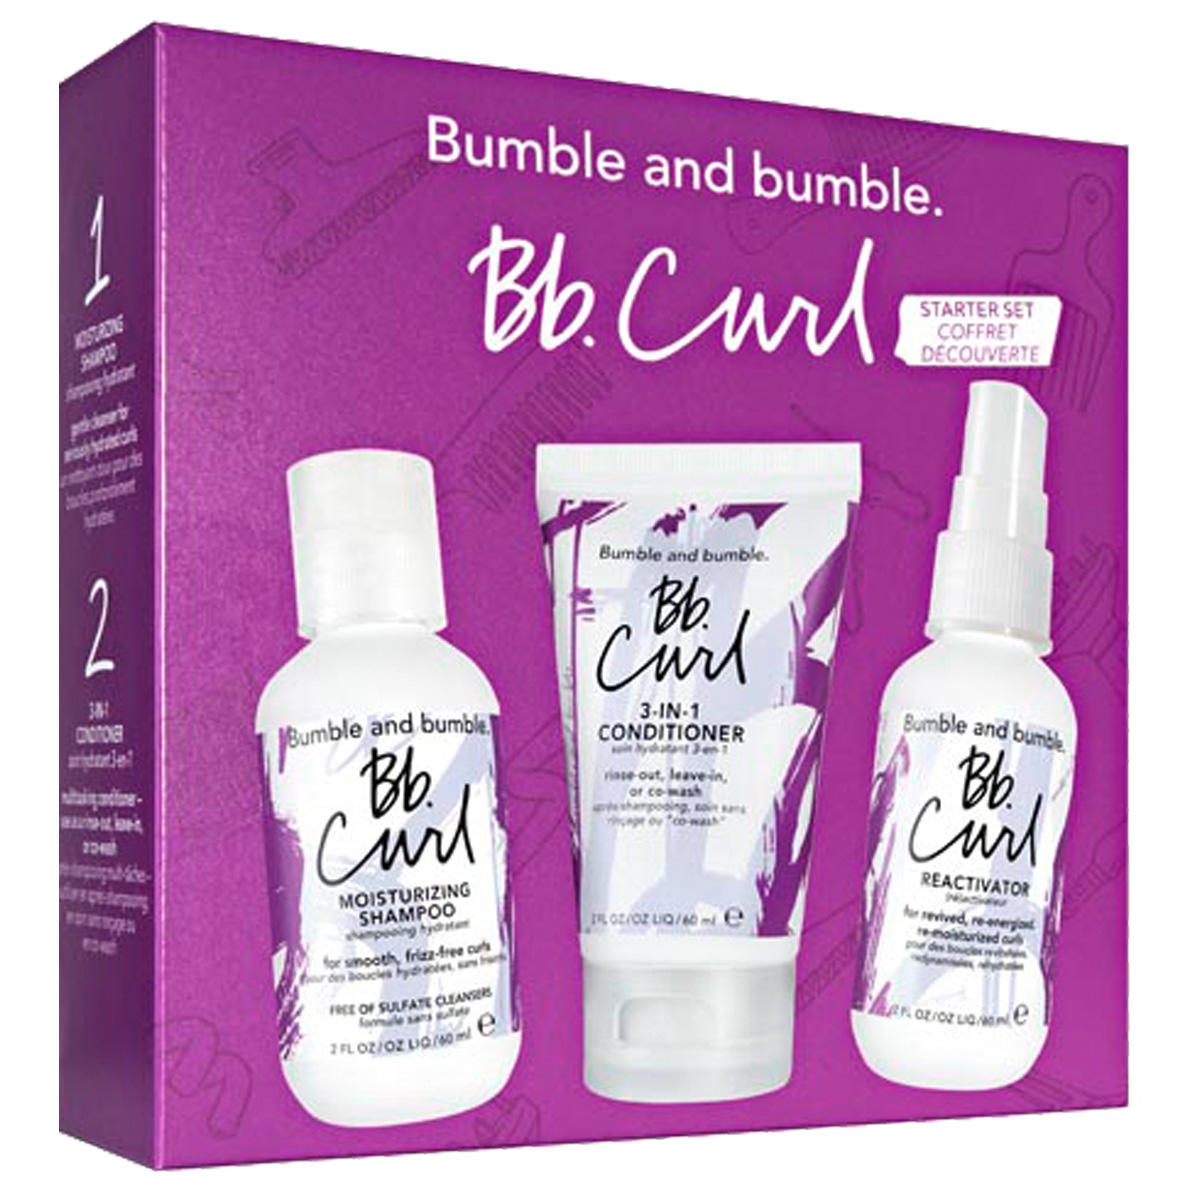 Bumble and bumble Curl Trial Set  - 1